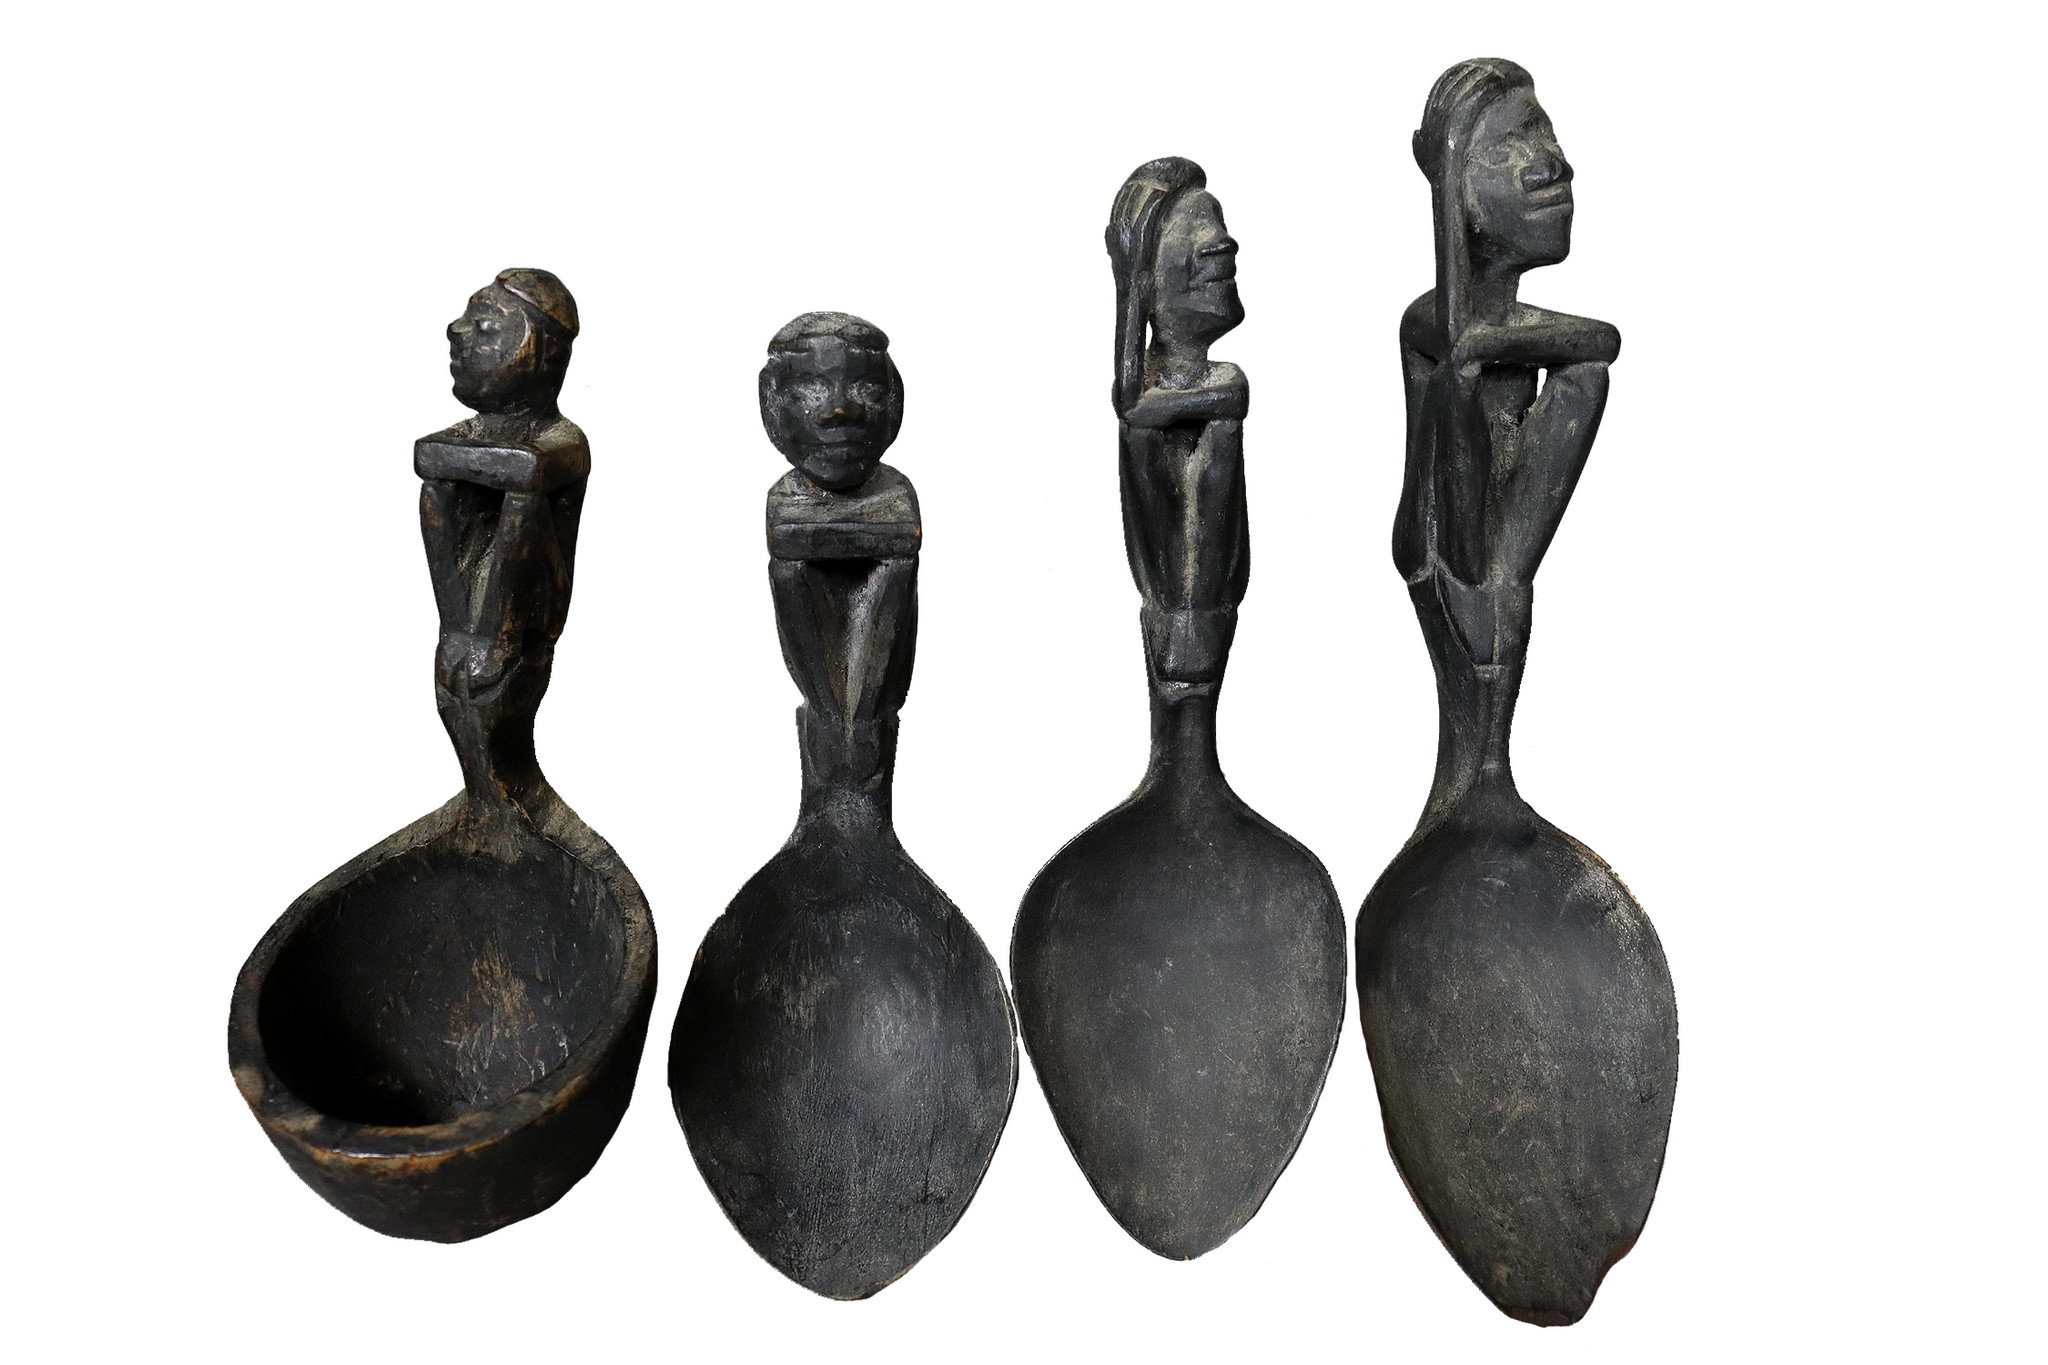 4 Pcs Antique wooden Ifugao spoons soup spoons  from  Province, Luzon, Philippines, 19th / 20thC